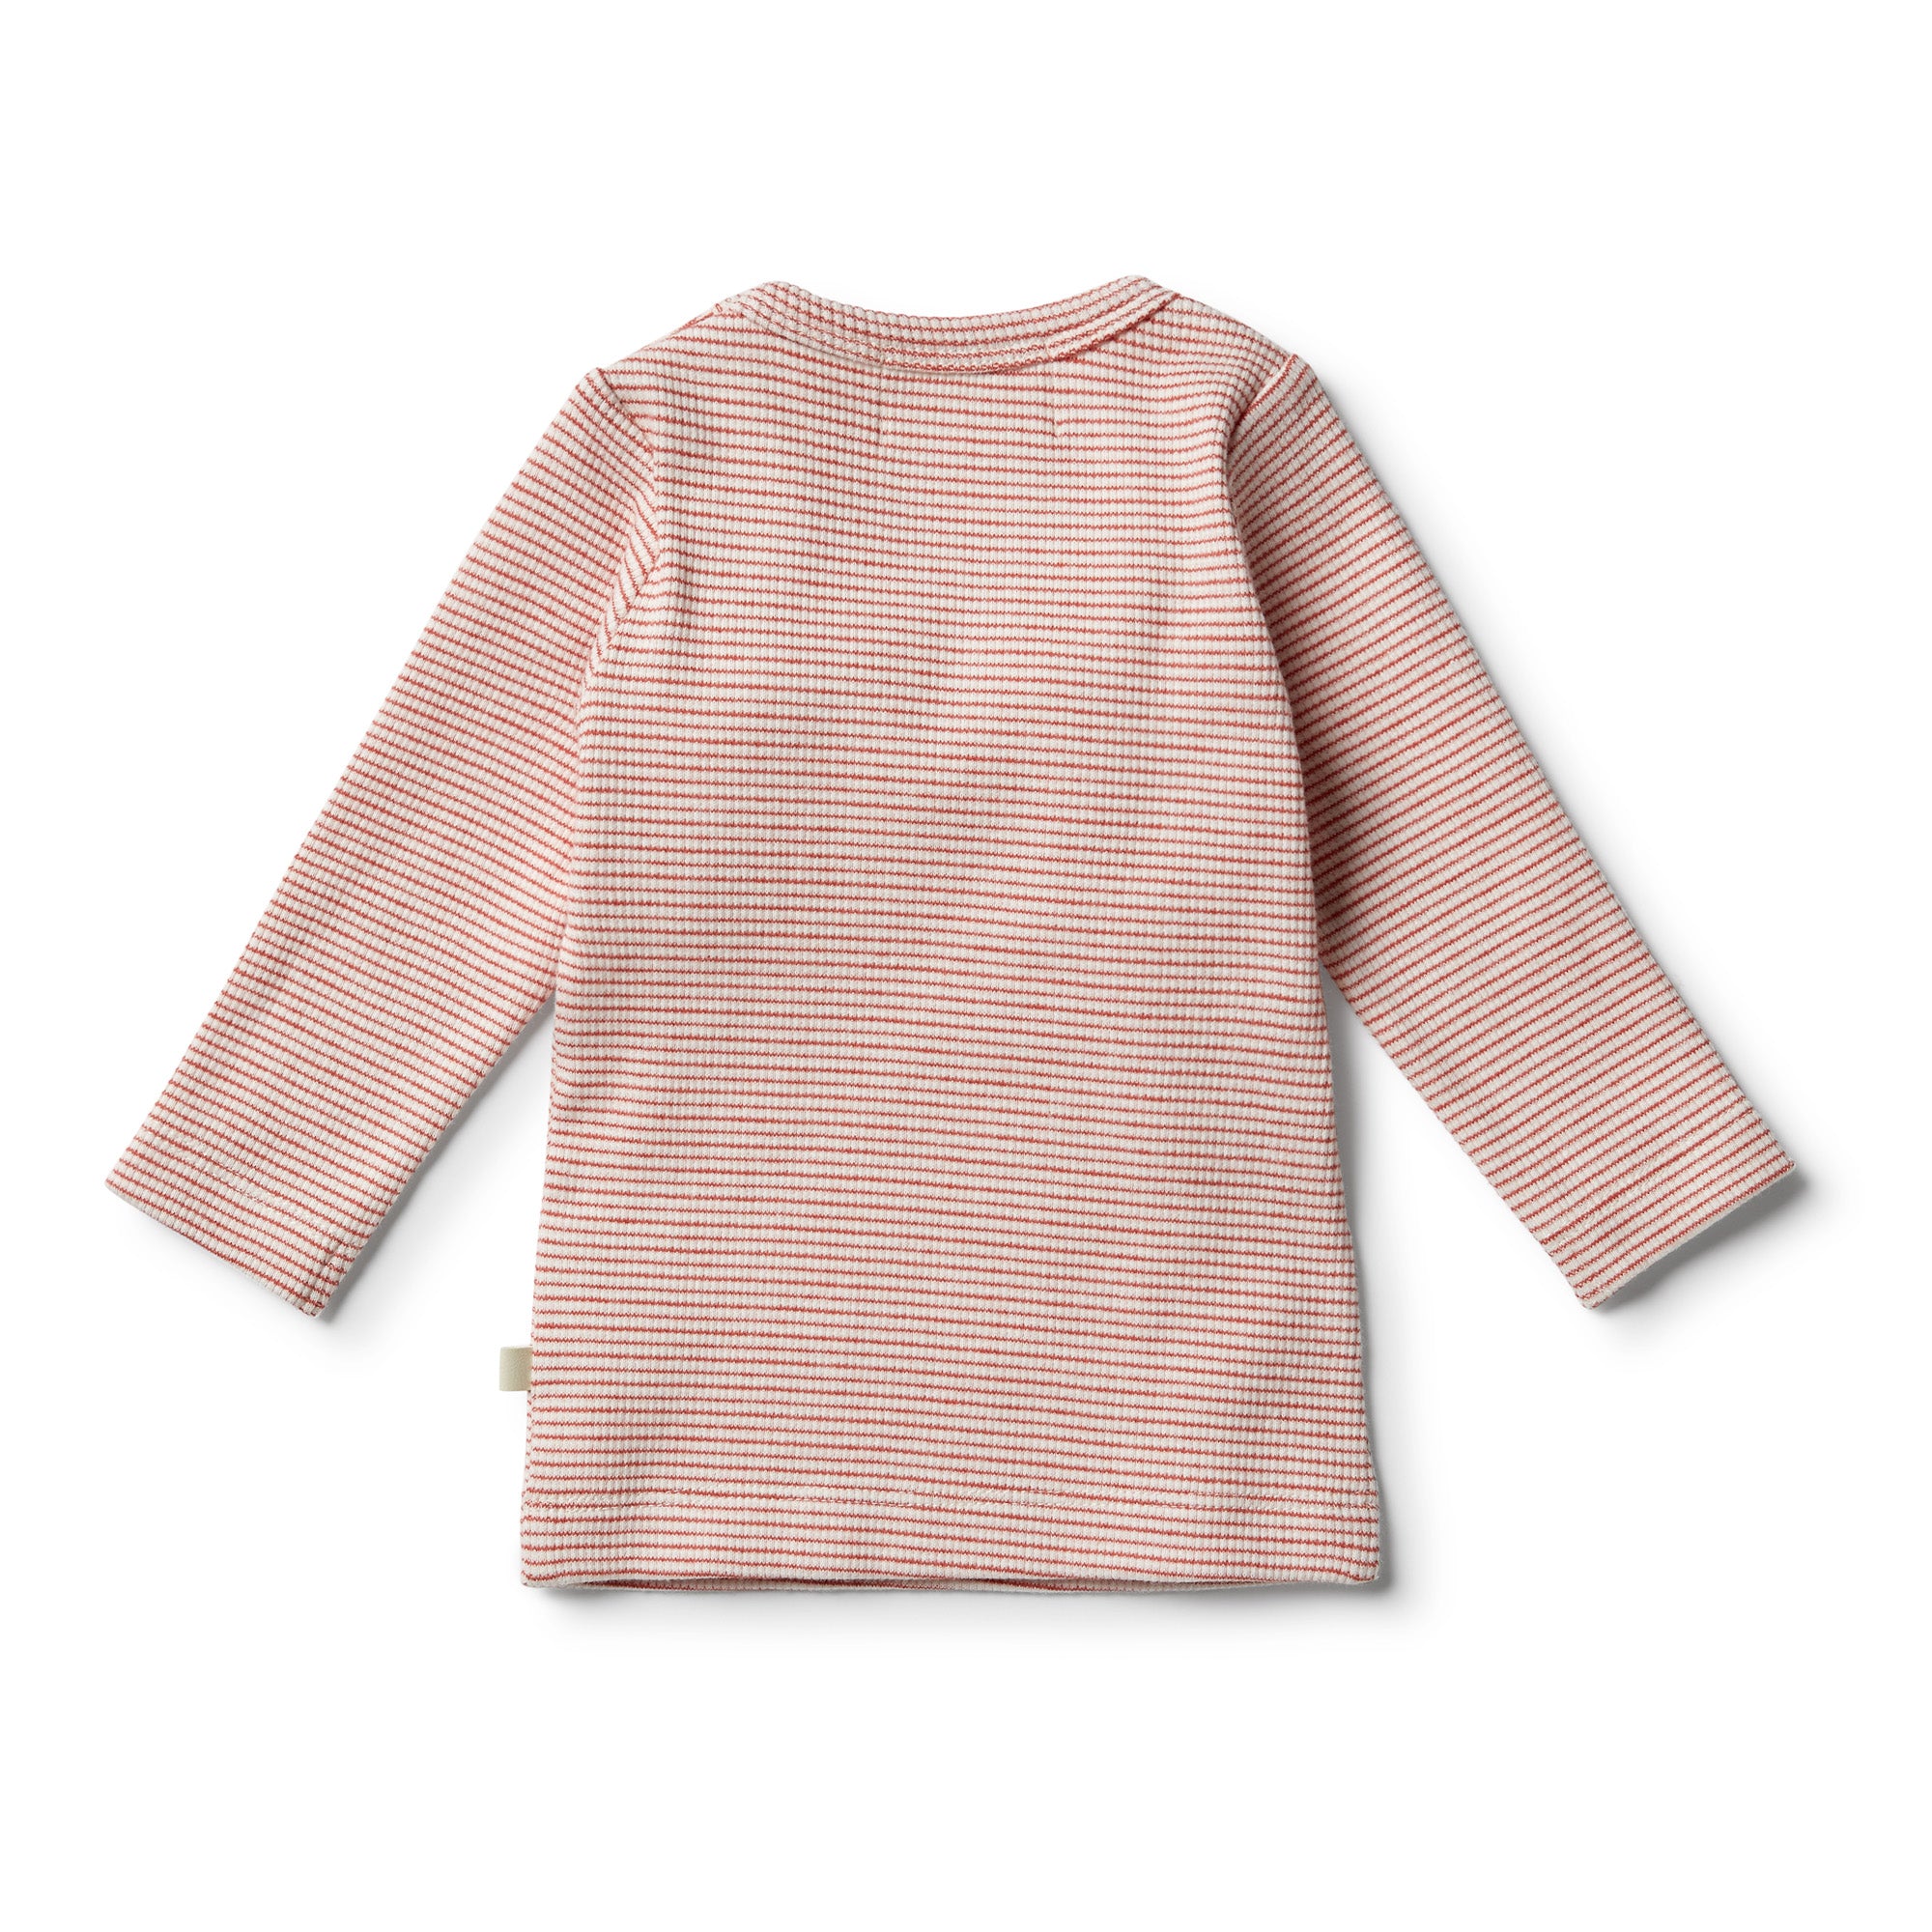 Organic Chilli Ruffle Top - Wilson and Frenchy